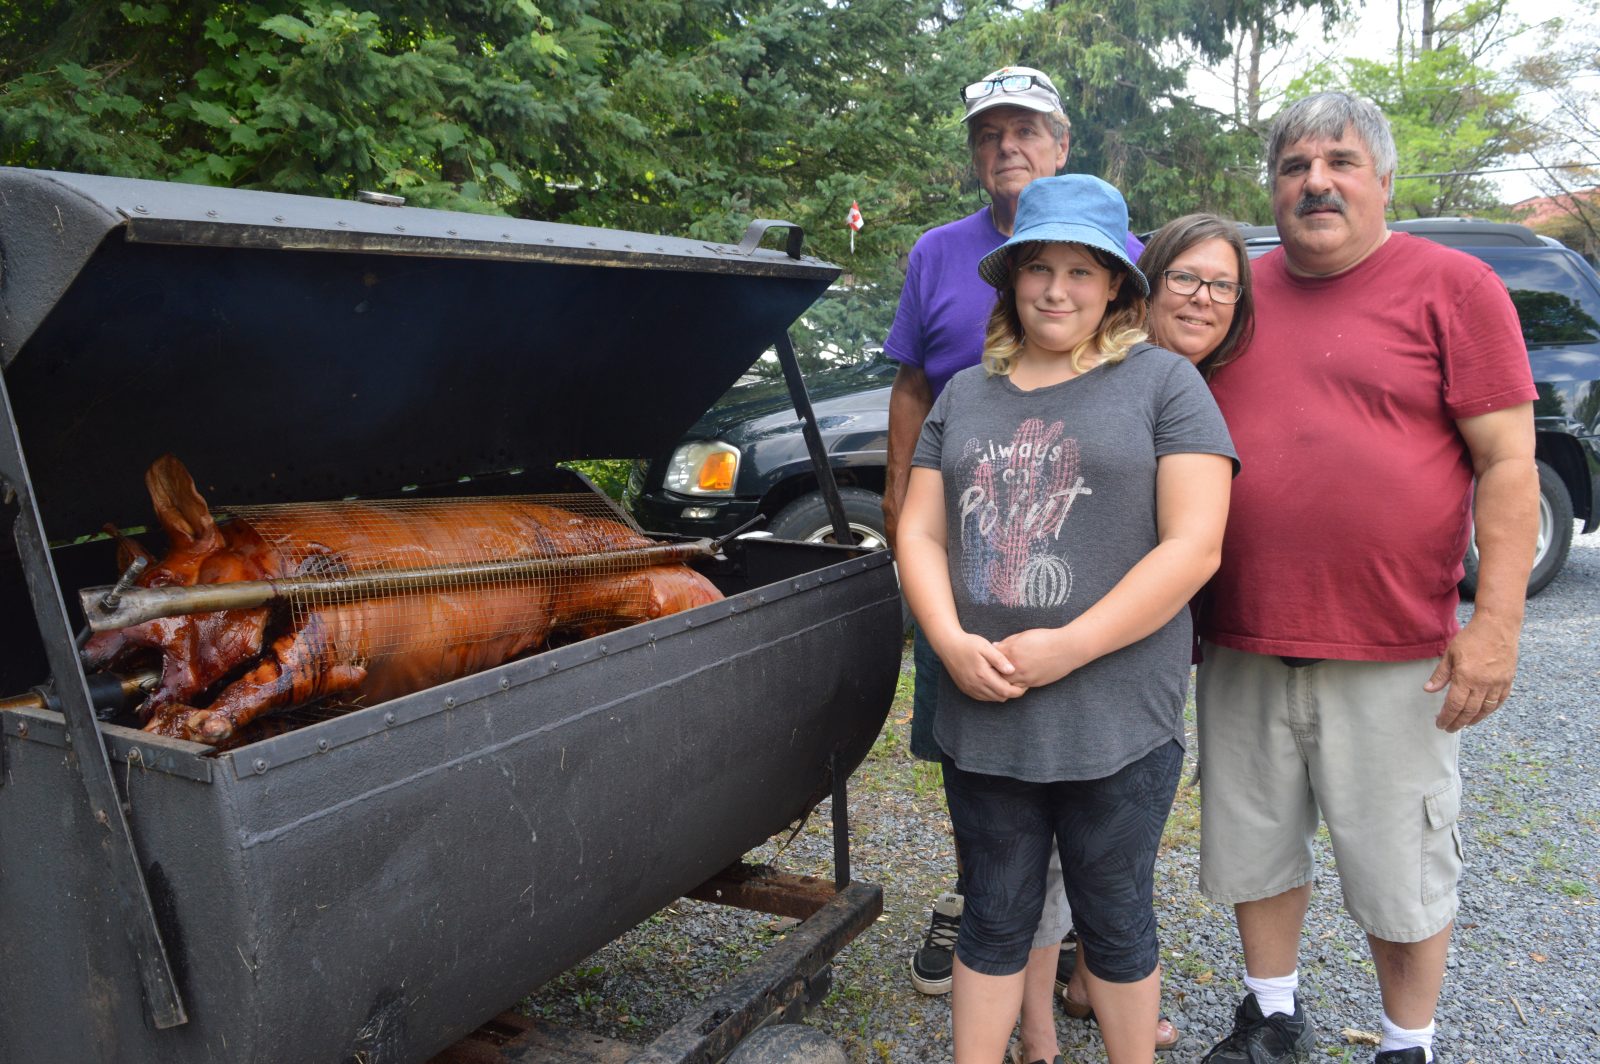 Annual pig roast for charity